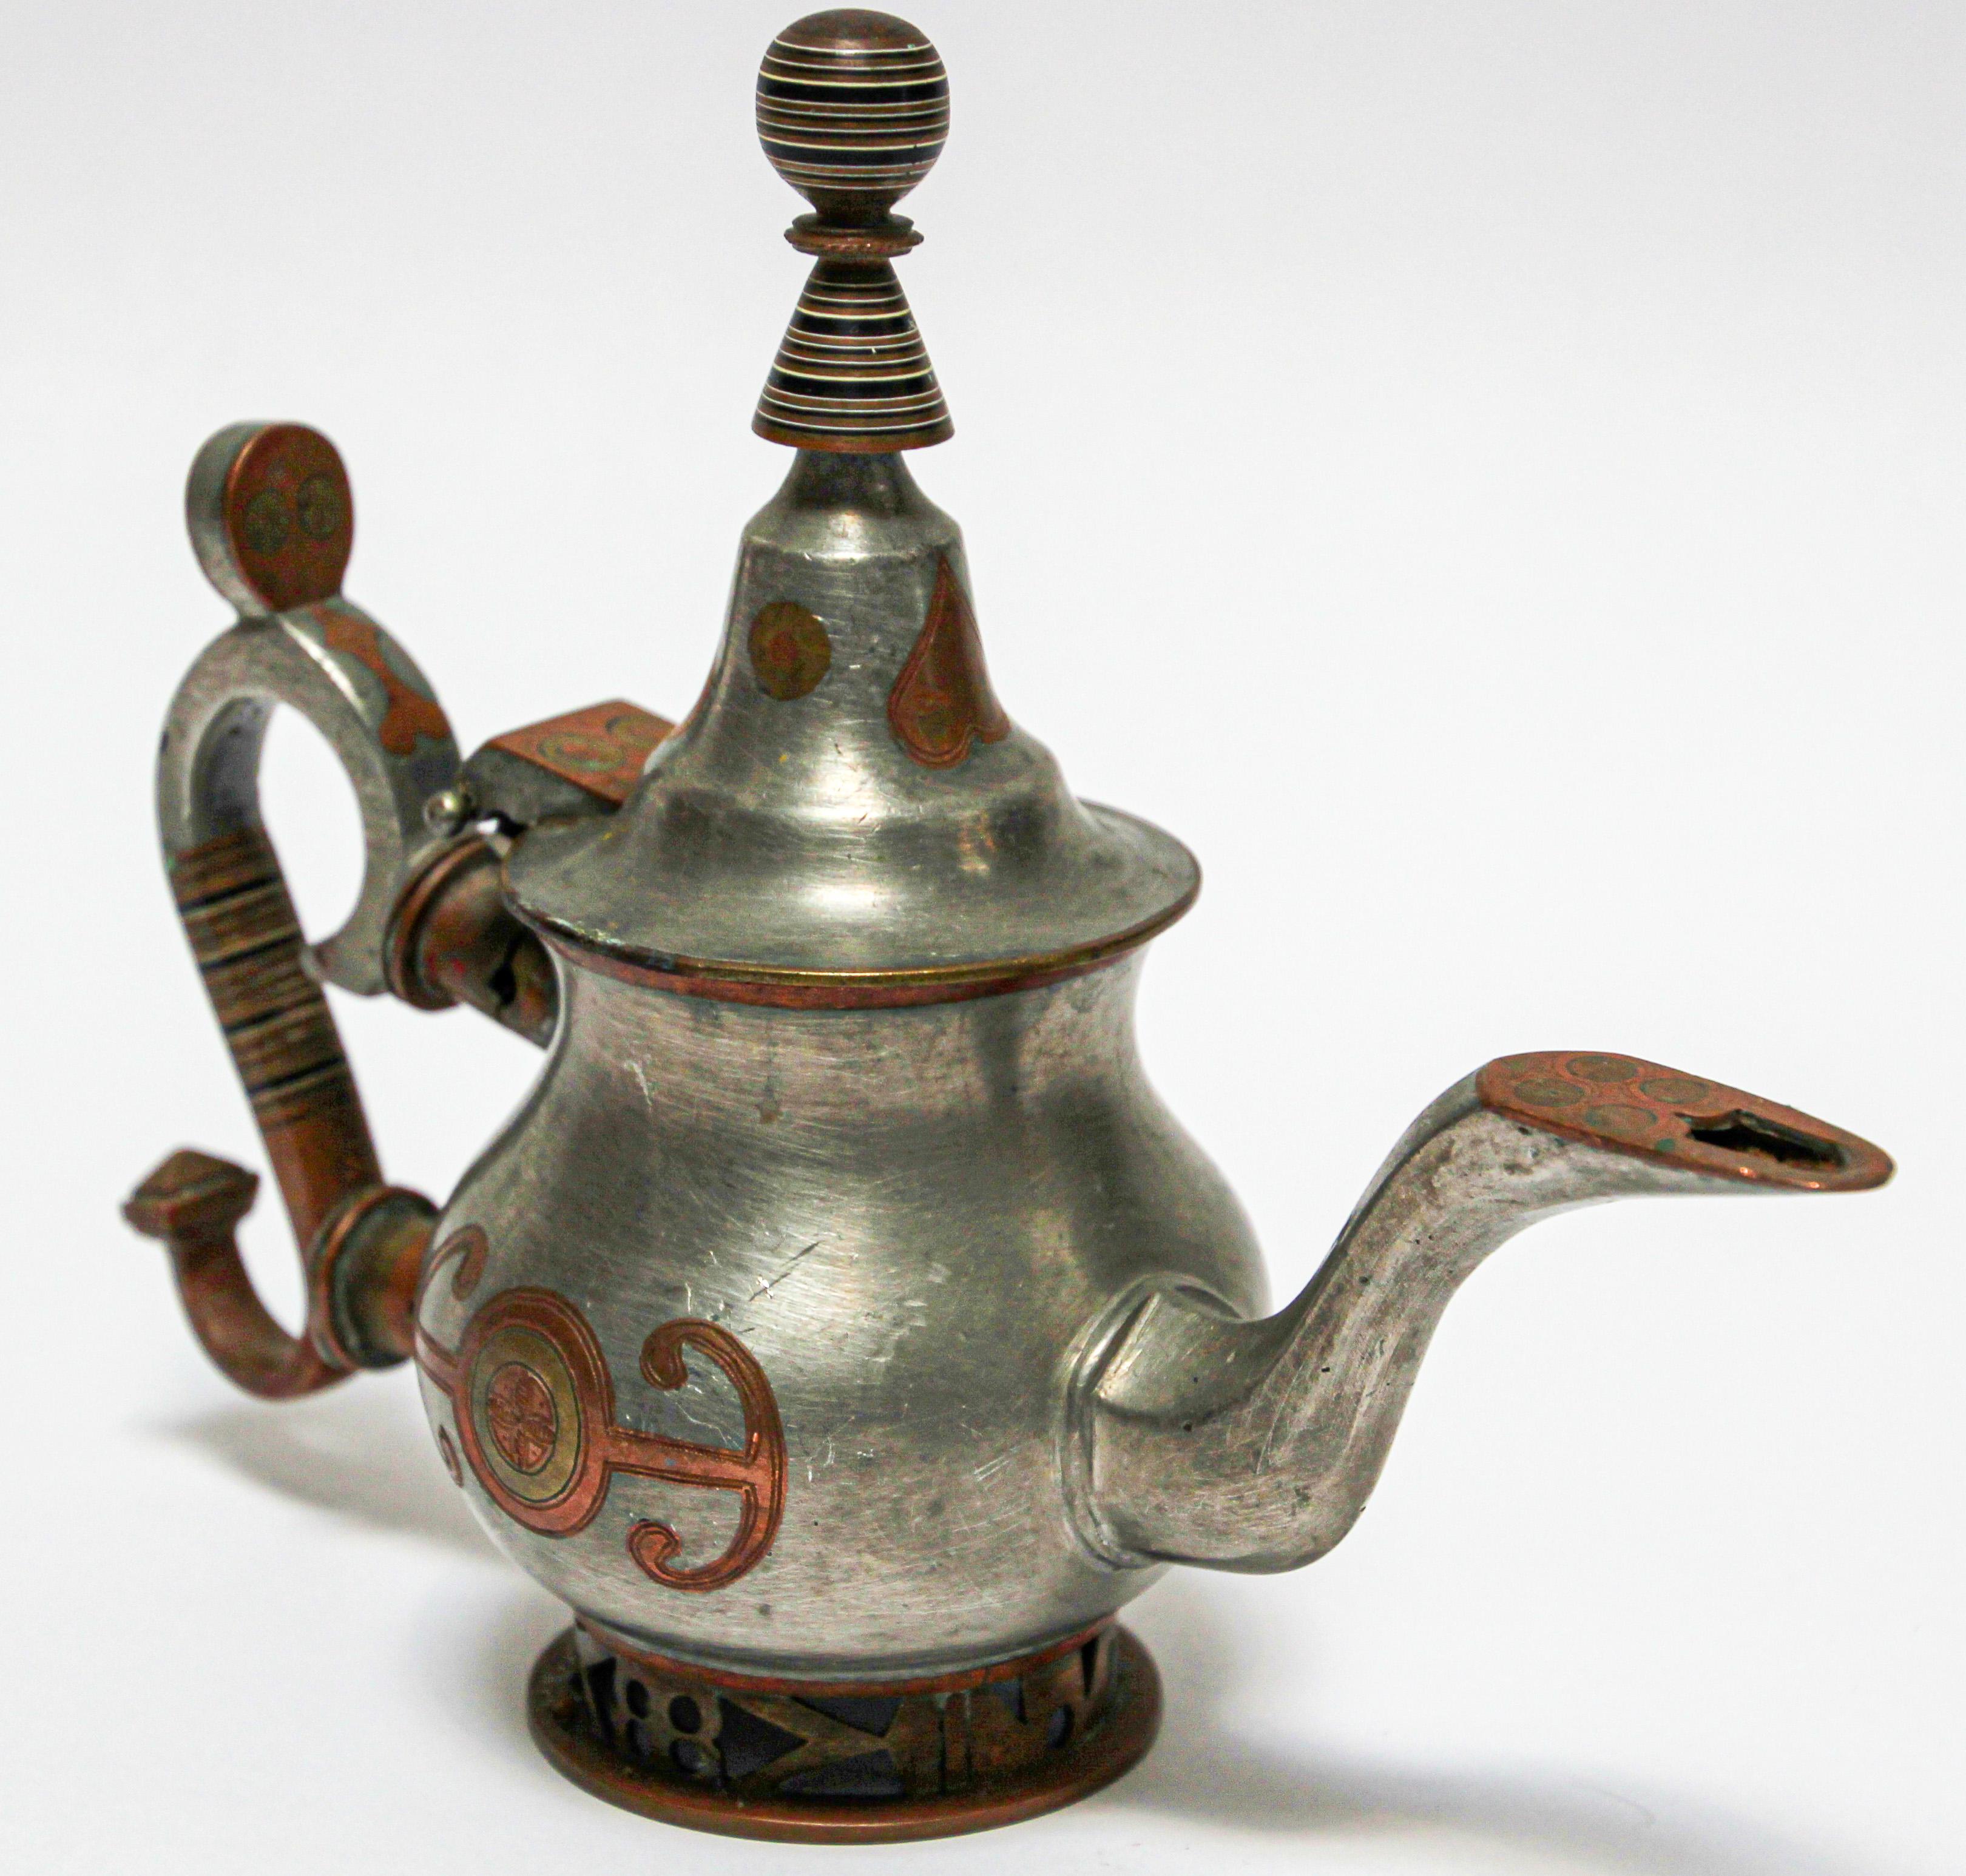 Mid-20th century Tuareg teapot from Mauritania, Africa, Western Sahara.
Handcrafted of pewter, copper and brass decorations.
The Tuareg people inhabit a large area, covering almost all the middle and western Sahara and the north-central